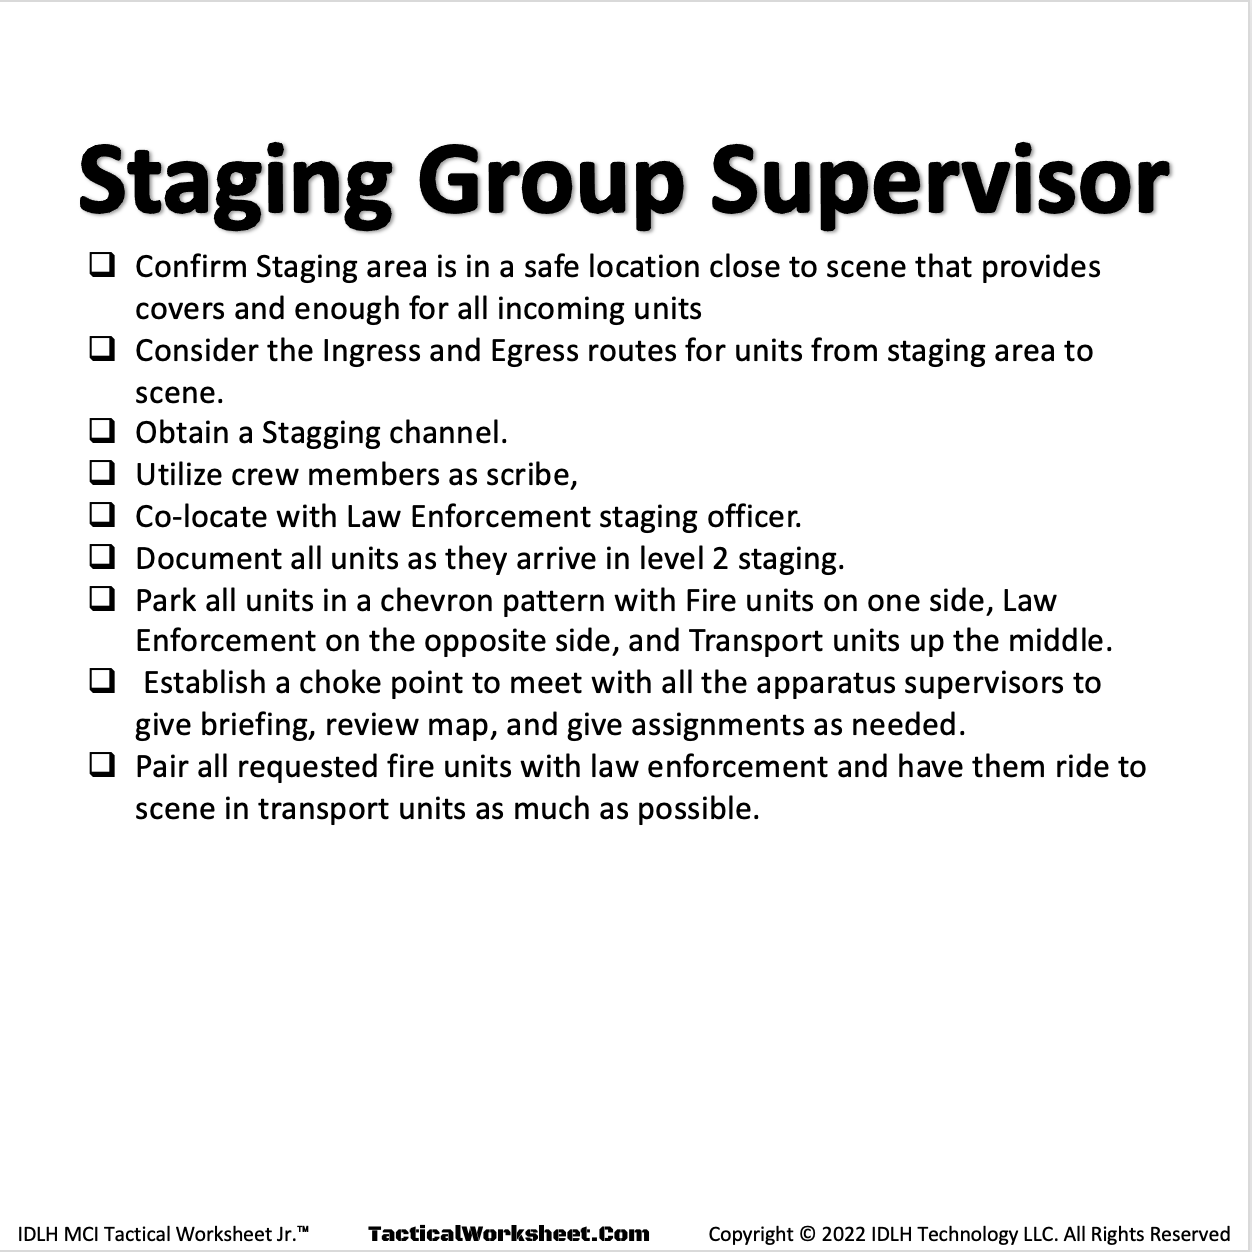 IDLH Active Threat Tactical Worksheet Incident Command Board Staging Group Supervisor